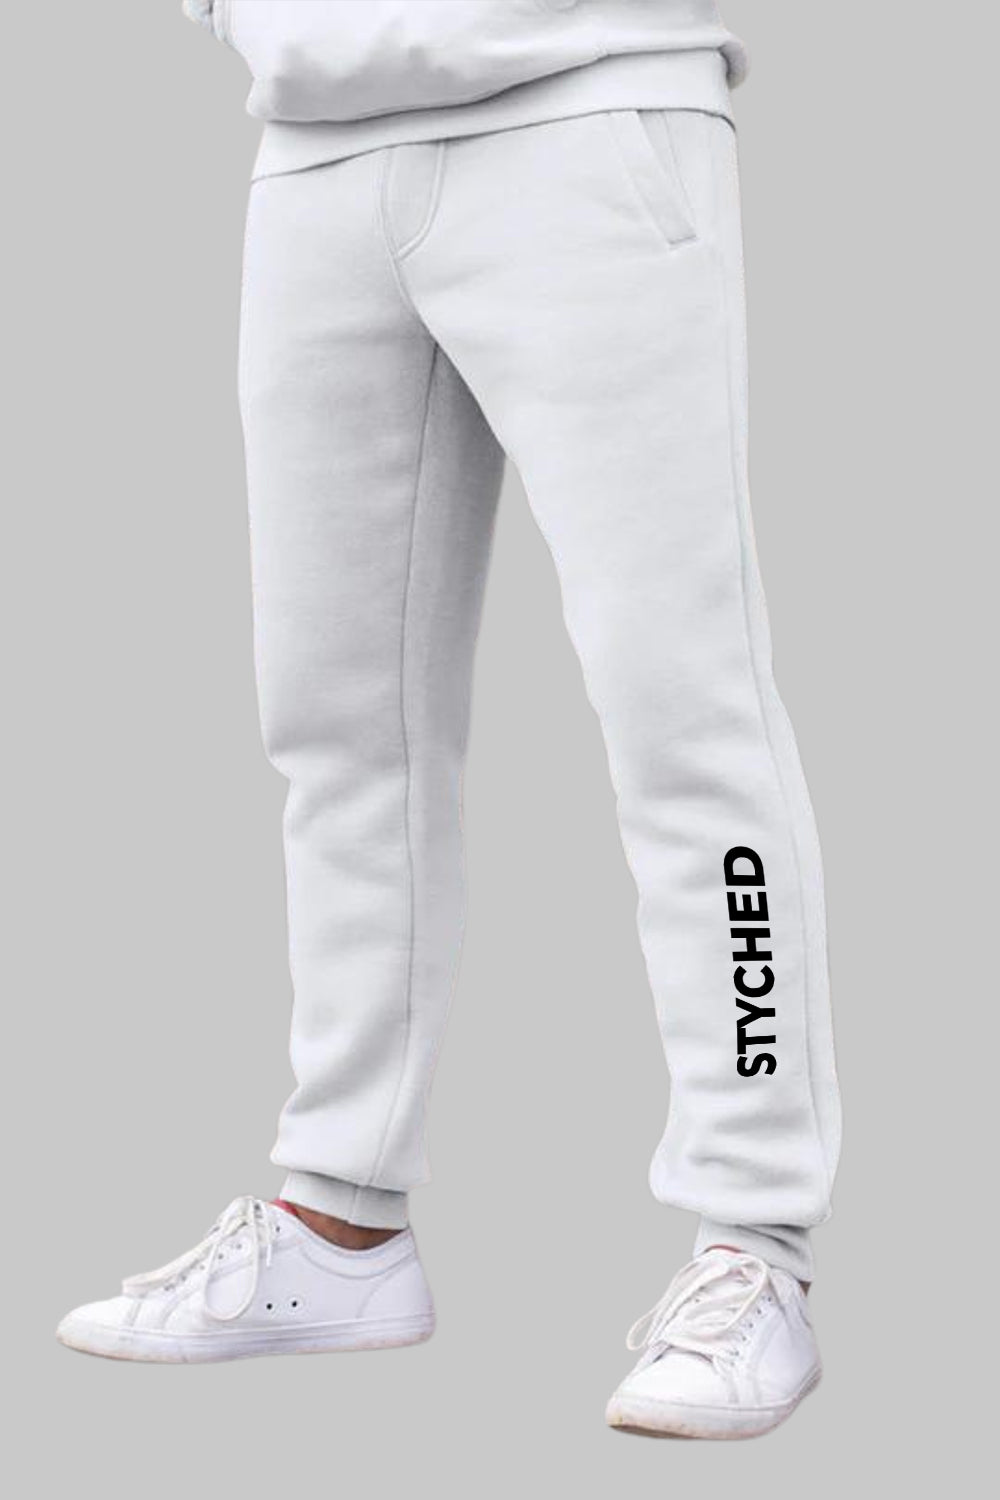 Black Styched Logo Graphic Printed White Joggers